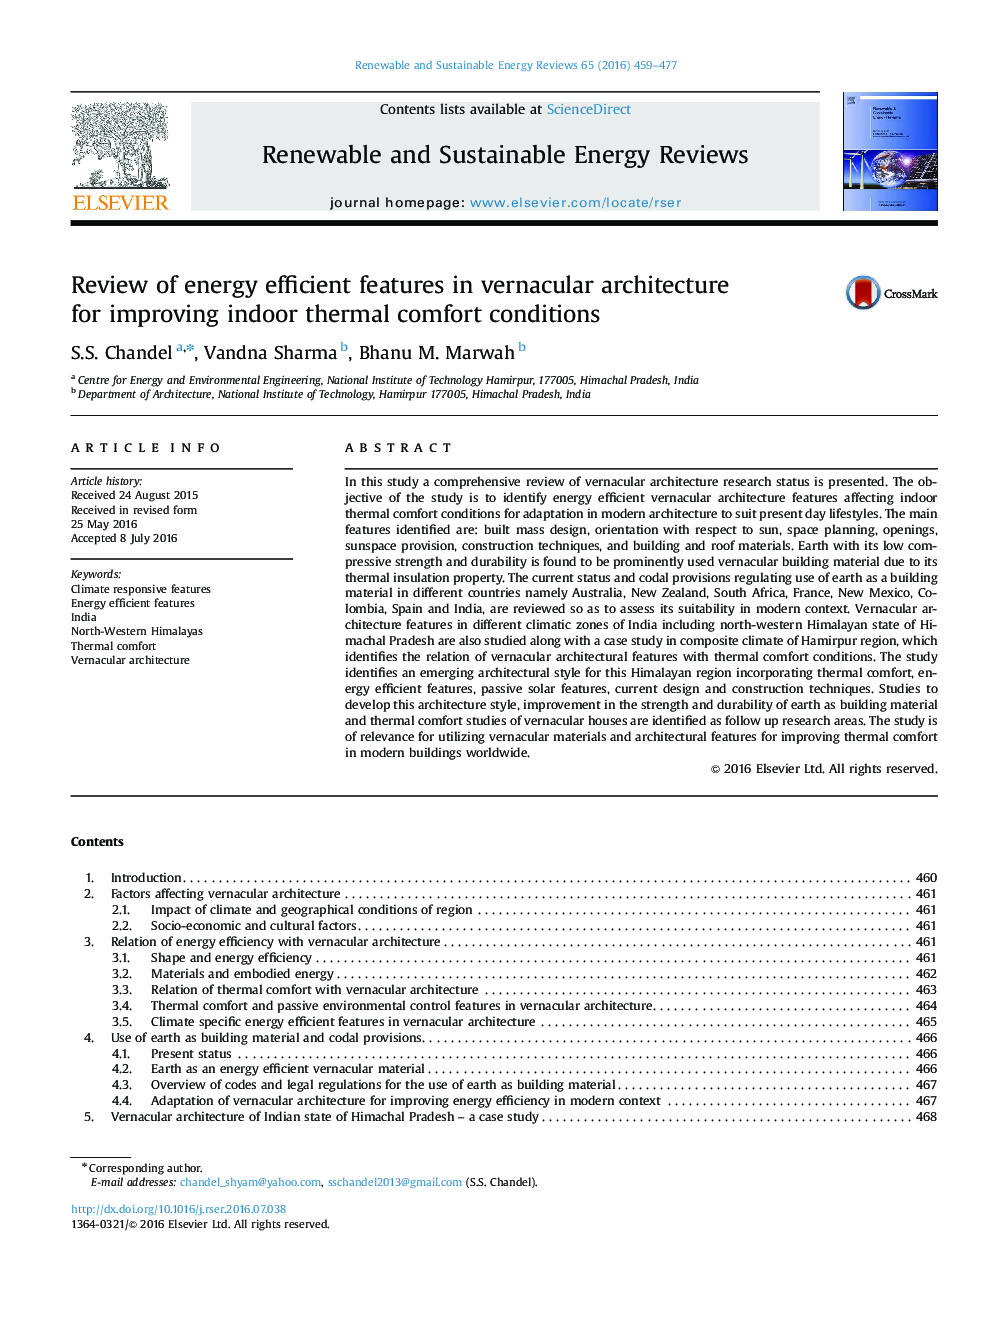 Review of energy efficient features in vernacular architecture for improving indoor thermal comfort conditions